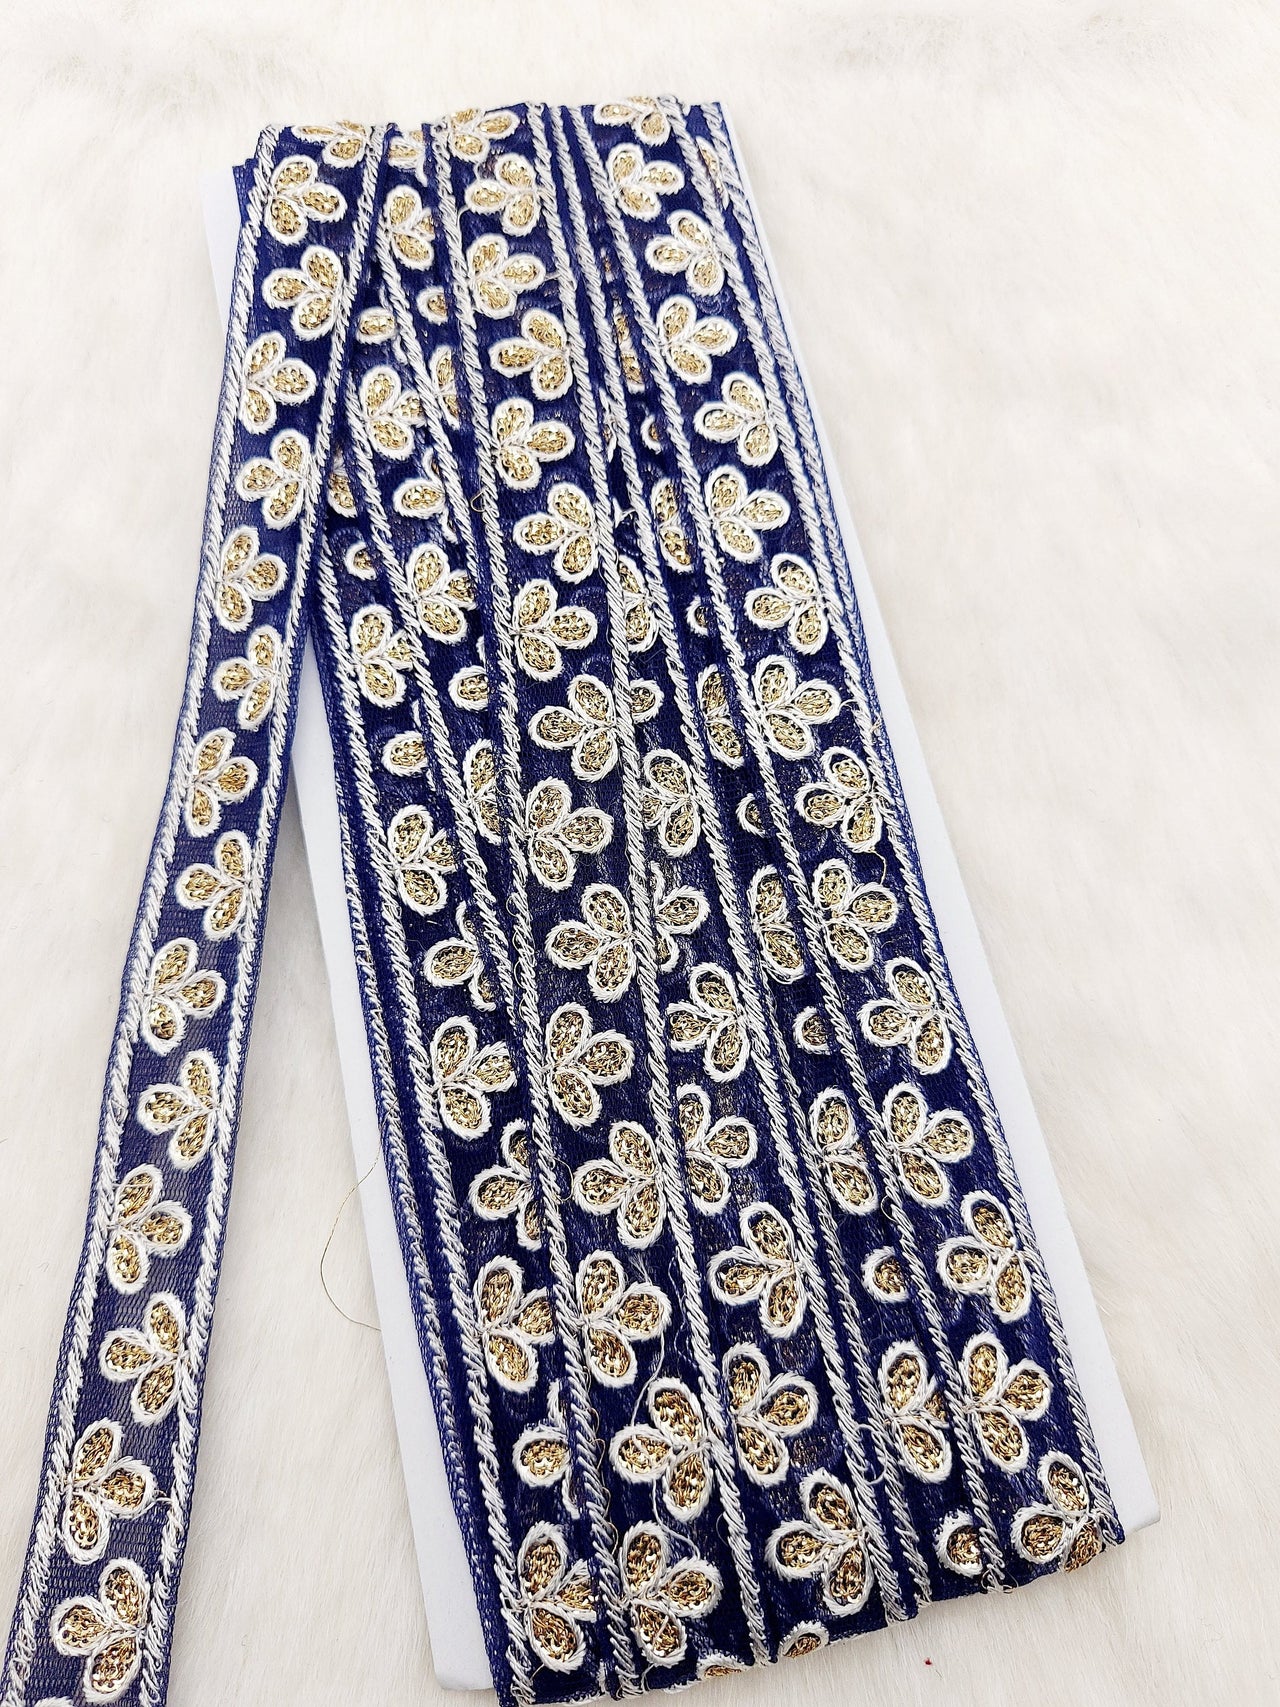 Wholesale Navy Blue Net Lace Floral Embroidery & Glitter Gold Sequins, Indian Wedding Border, Gifting Ribbon Costume Trim Fashion Trimming